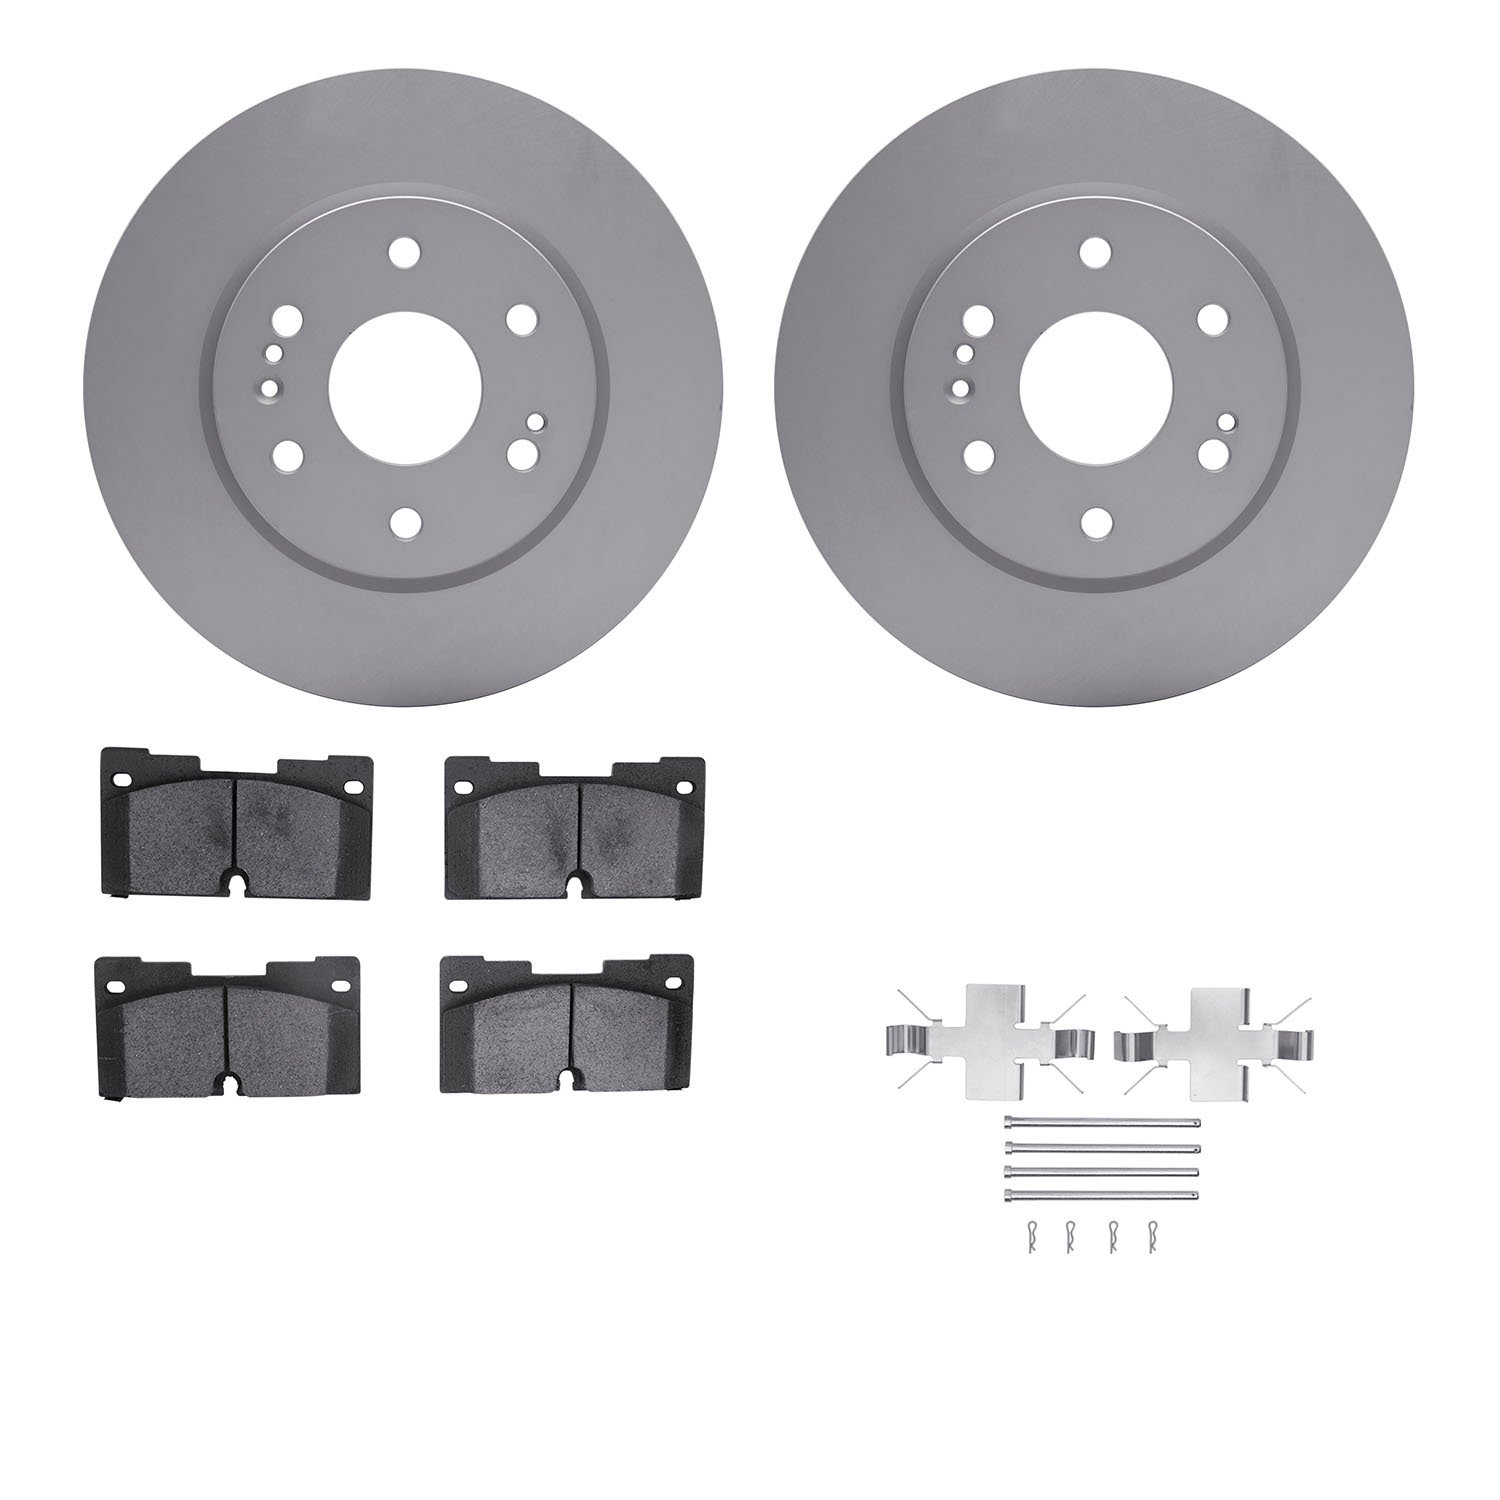 4412-47010 Geospec Brake Rotors with Ultimate-Duty Brake Pads & Hardware, Fits Select GM, Position: Front